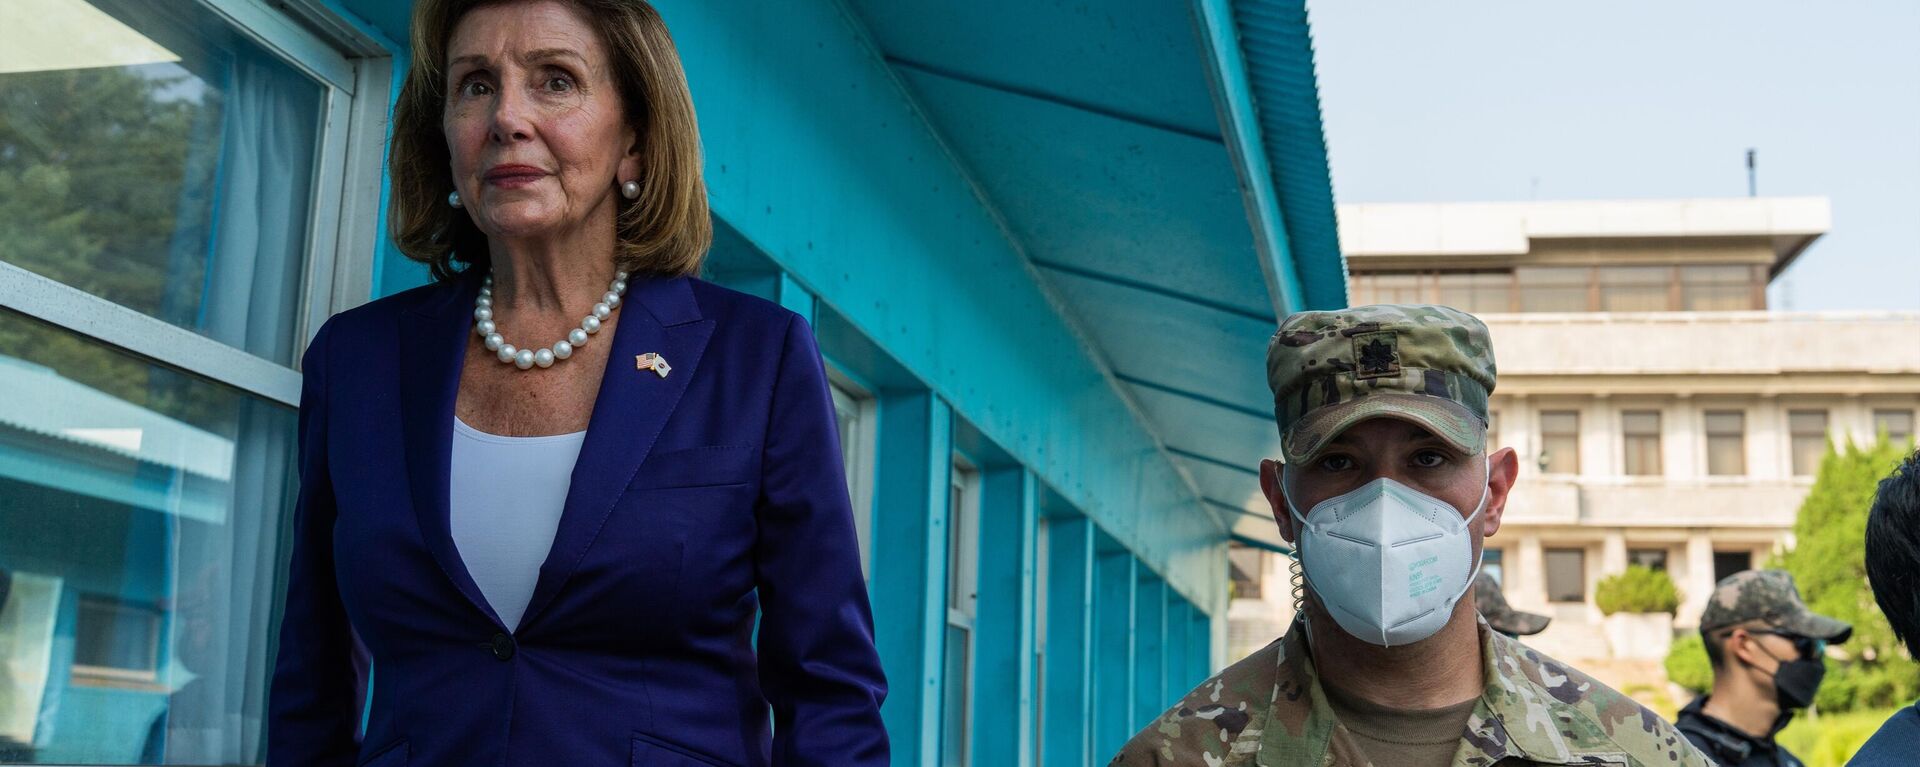 Nancy Pelosi touring the demilitarized zone frontier between North and South Korea. - Sputnik International, 1920, 06.08.2022